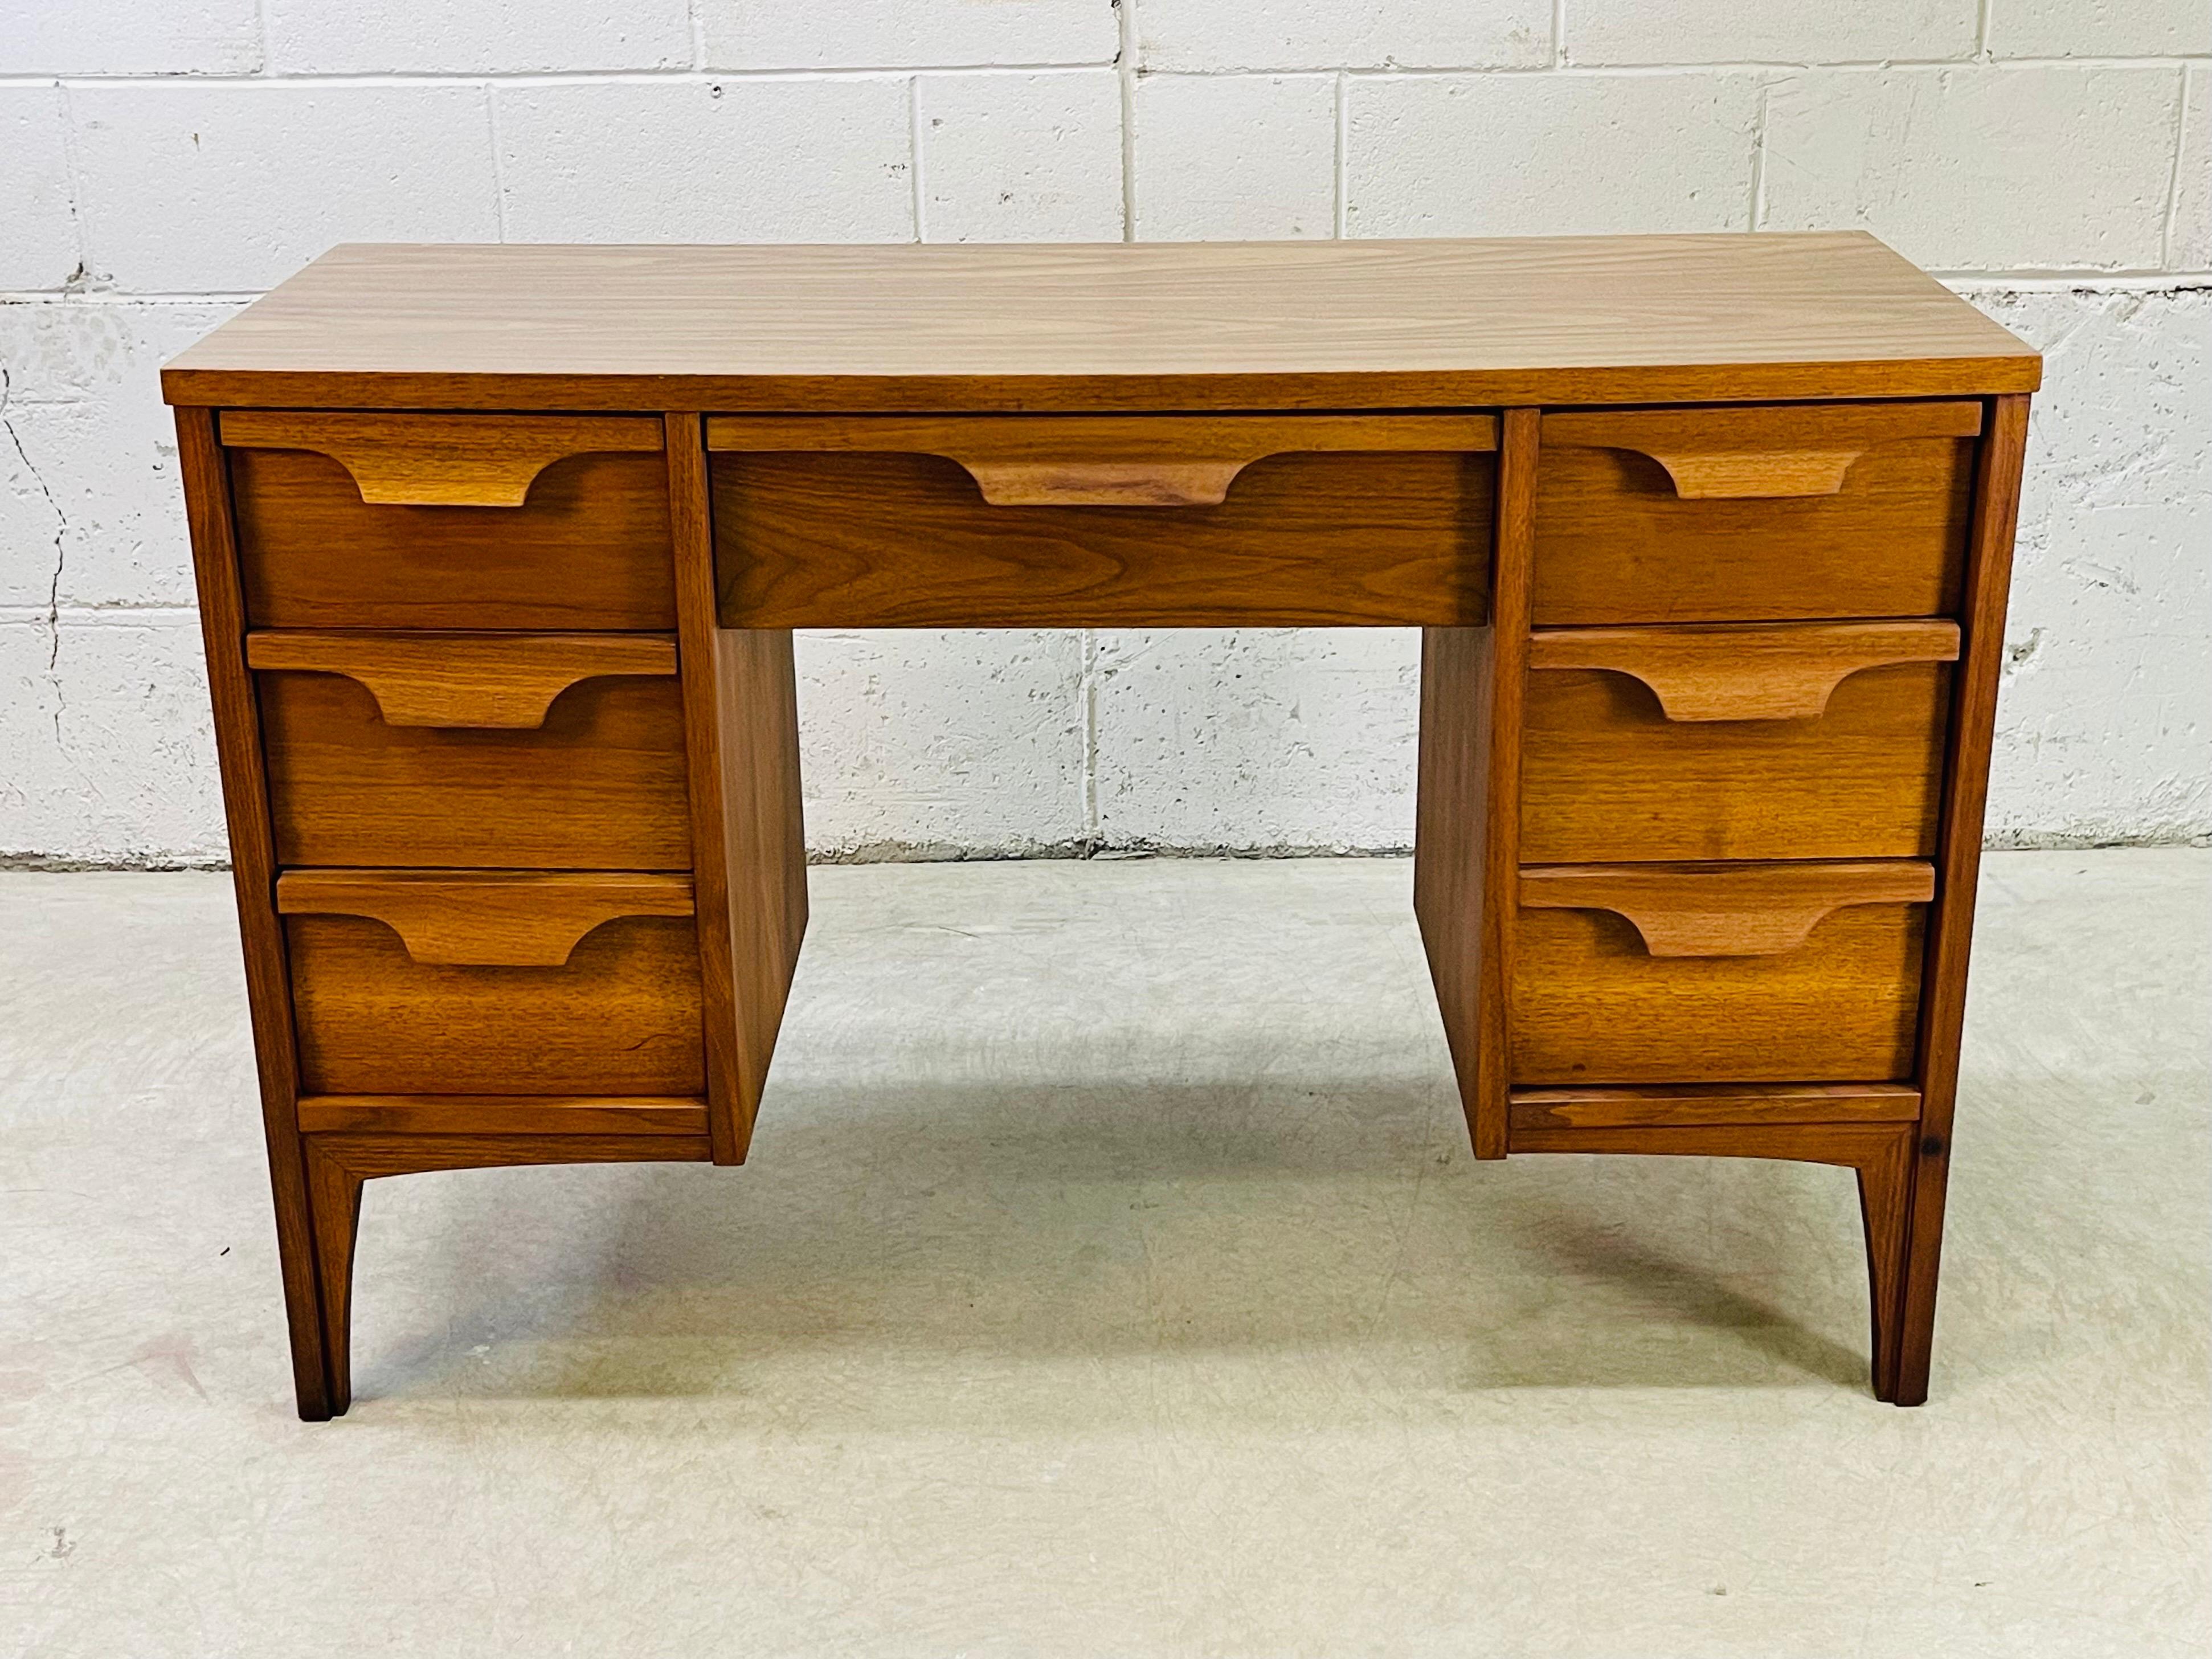 Vintage 1960s walnut wood and laminate top writing desk with seven drawers. The desk drawers have solid walnut sculpted pulls. Knee clearance is 20”W x 23”H. Marked 1960 on the back.